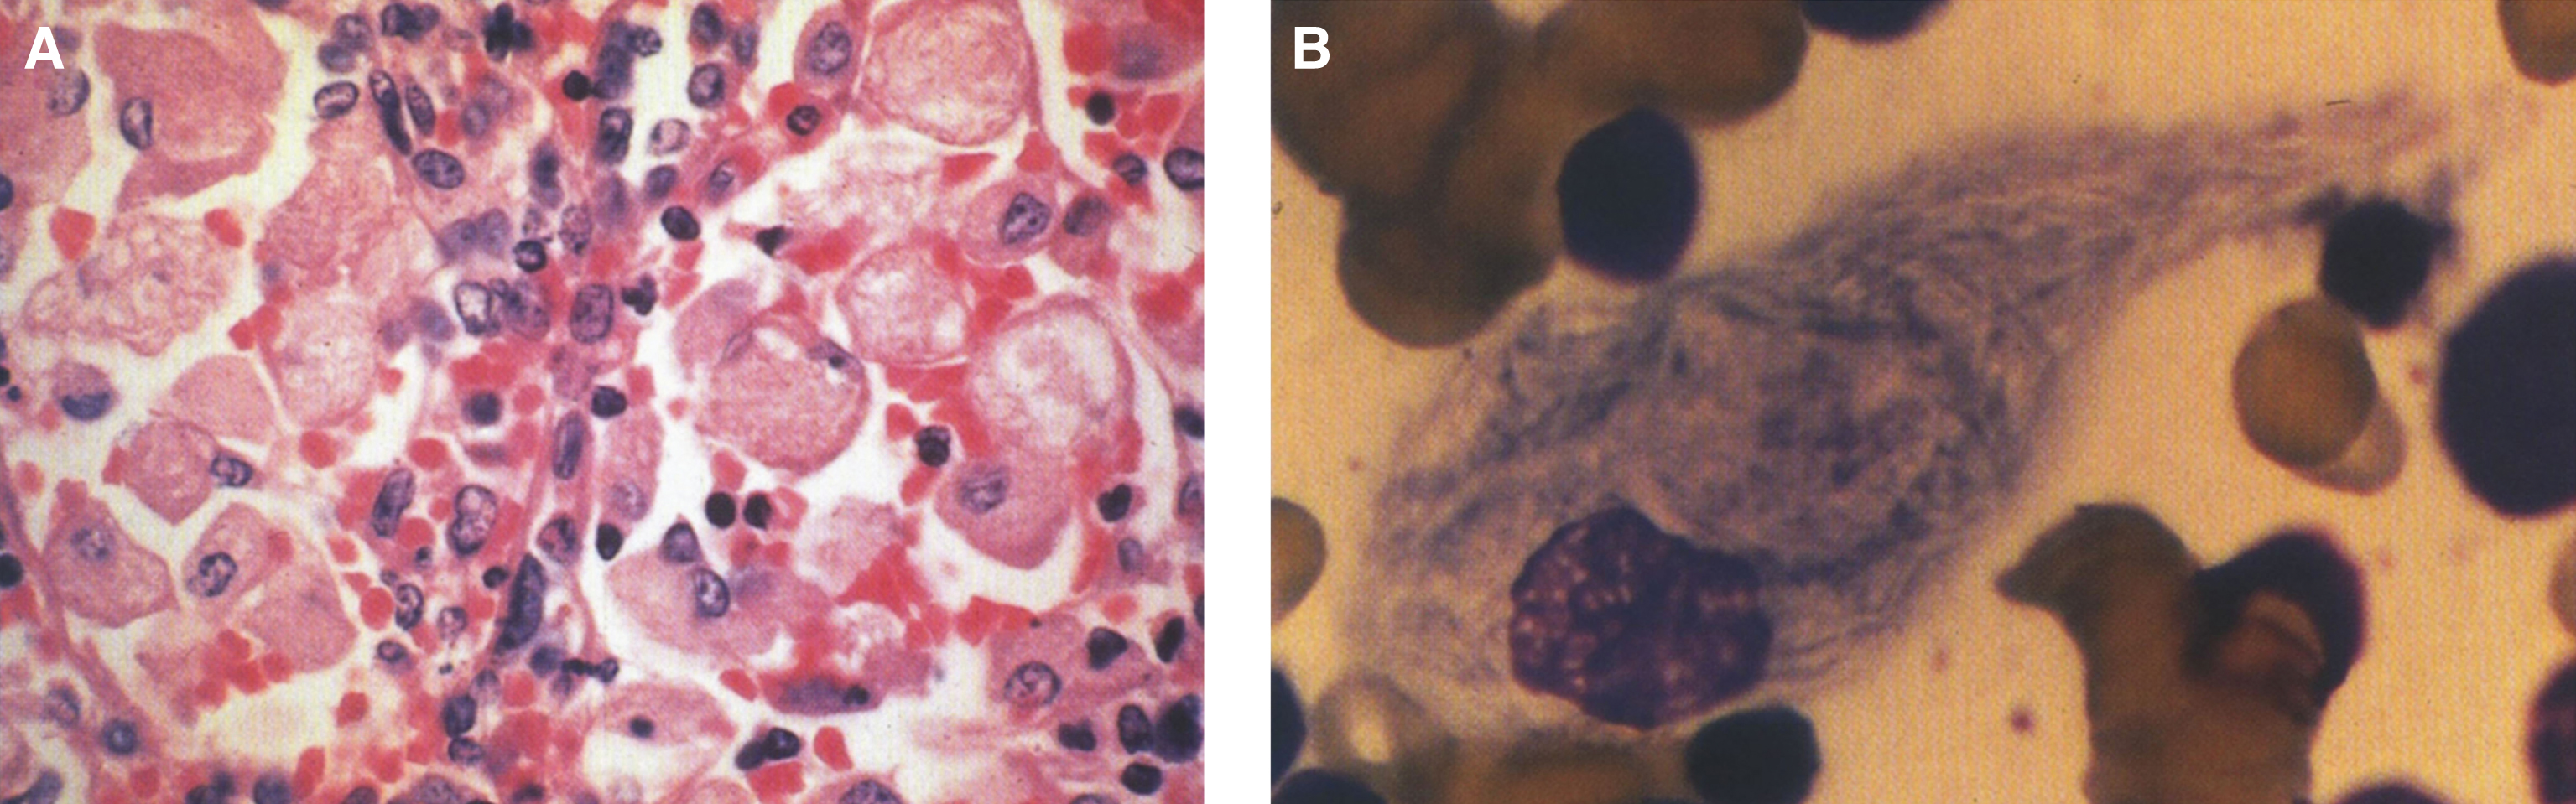 Gaucher disease. (A) Microscopic section of the spleen. The sinusoids are filled with large distended storage cells. (B) The bone marrow contains a large Gaucher cell with cytoplasmic striations with typical “crinkled tissue paper” appearance.